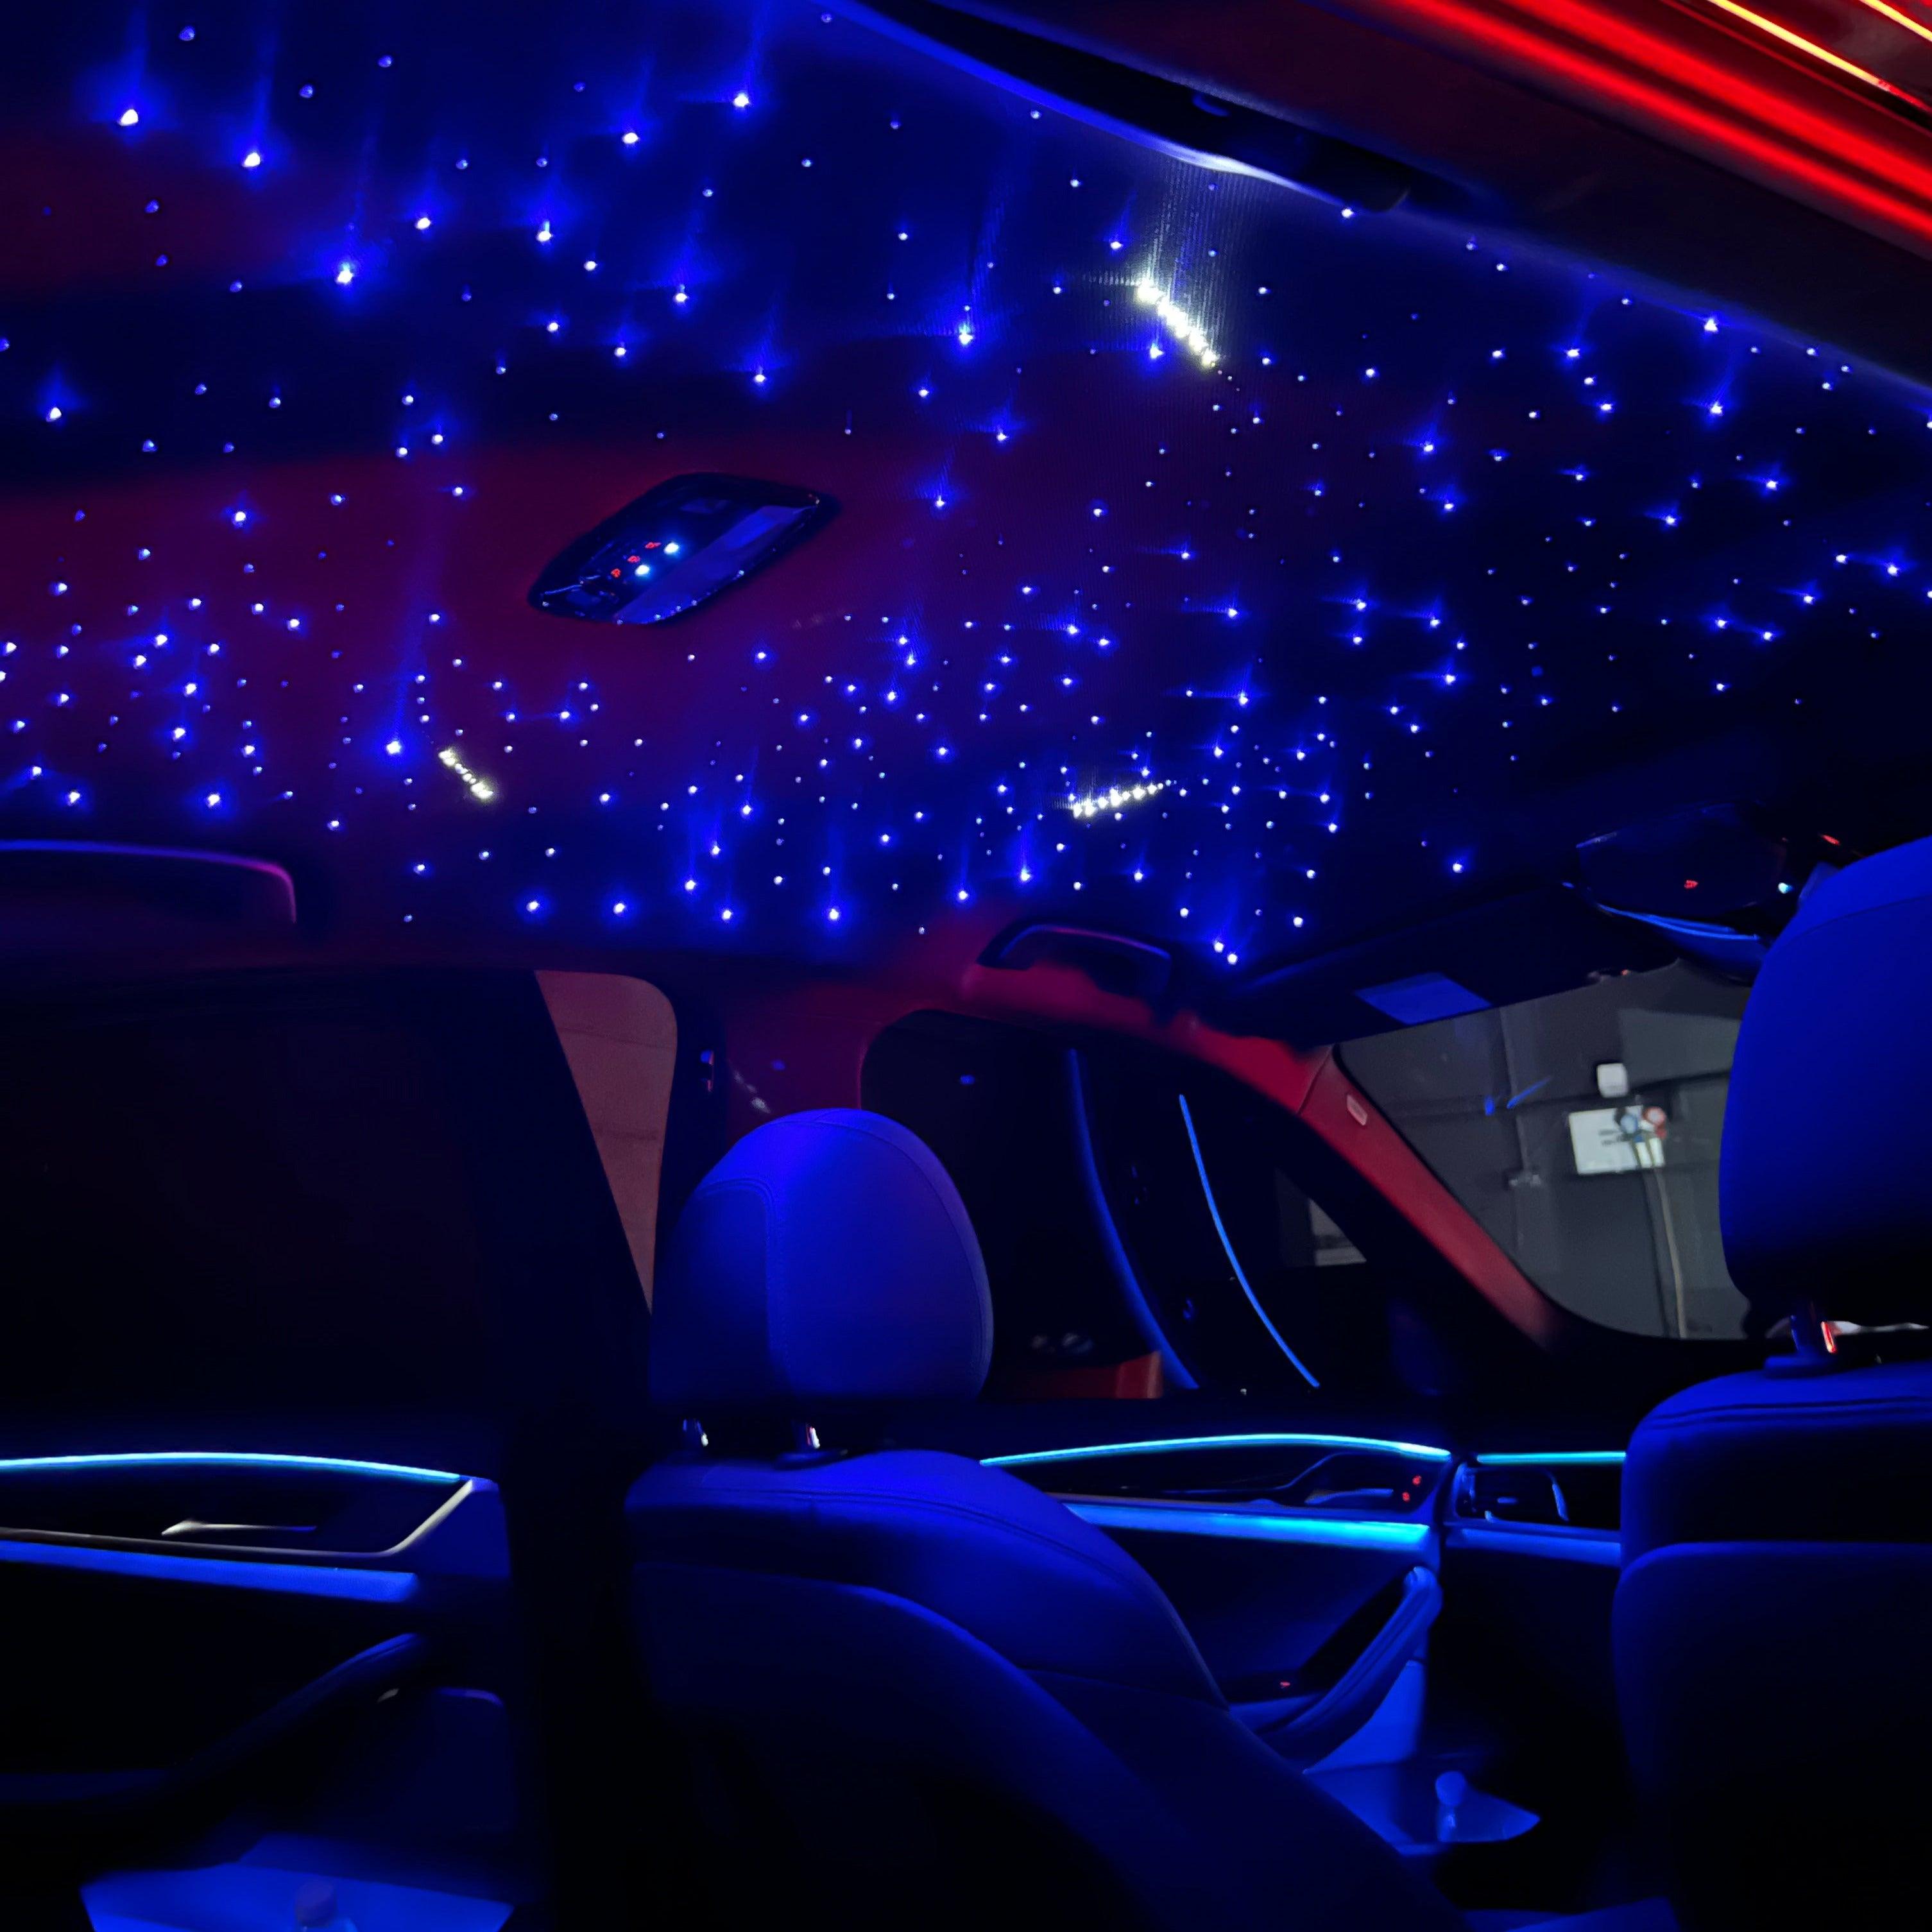 Fibre Optic Starlight Roof Packages Twinkle + Colour Changing Mobile App - AUTOSTYLE UK